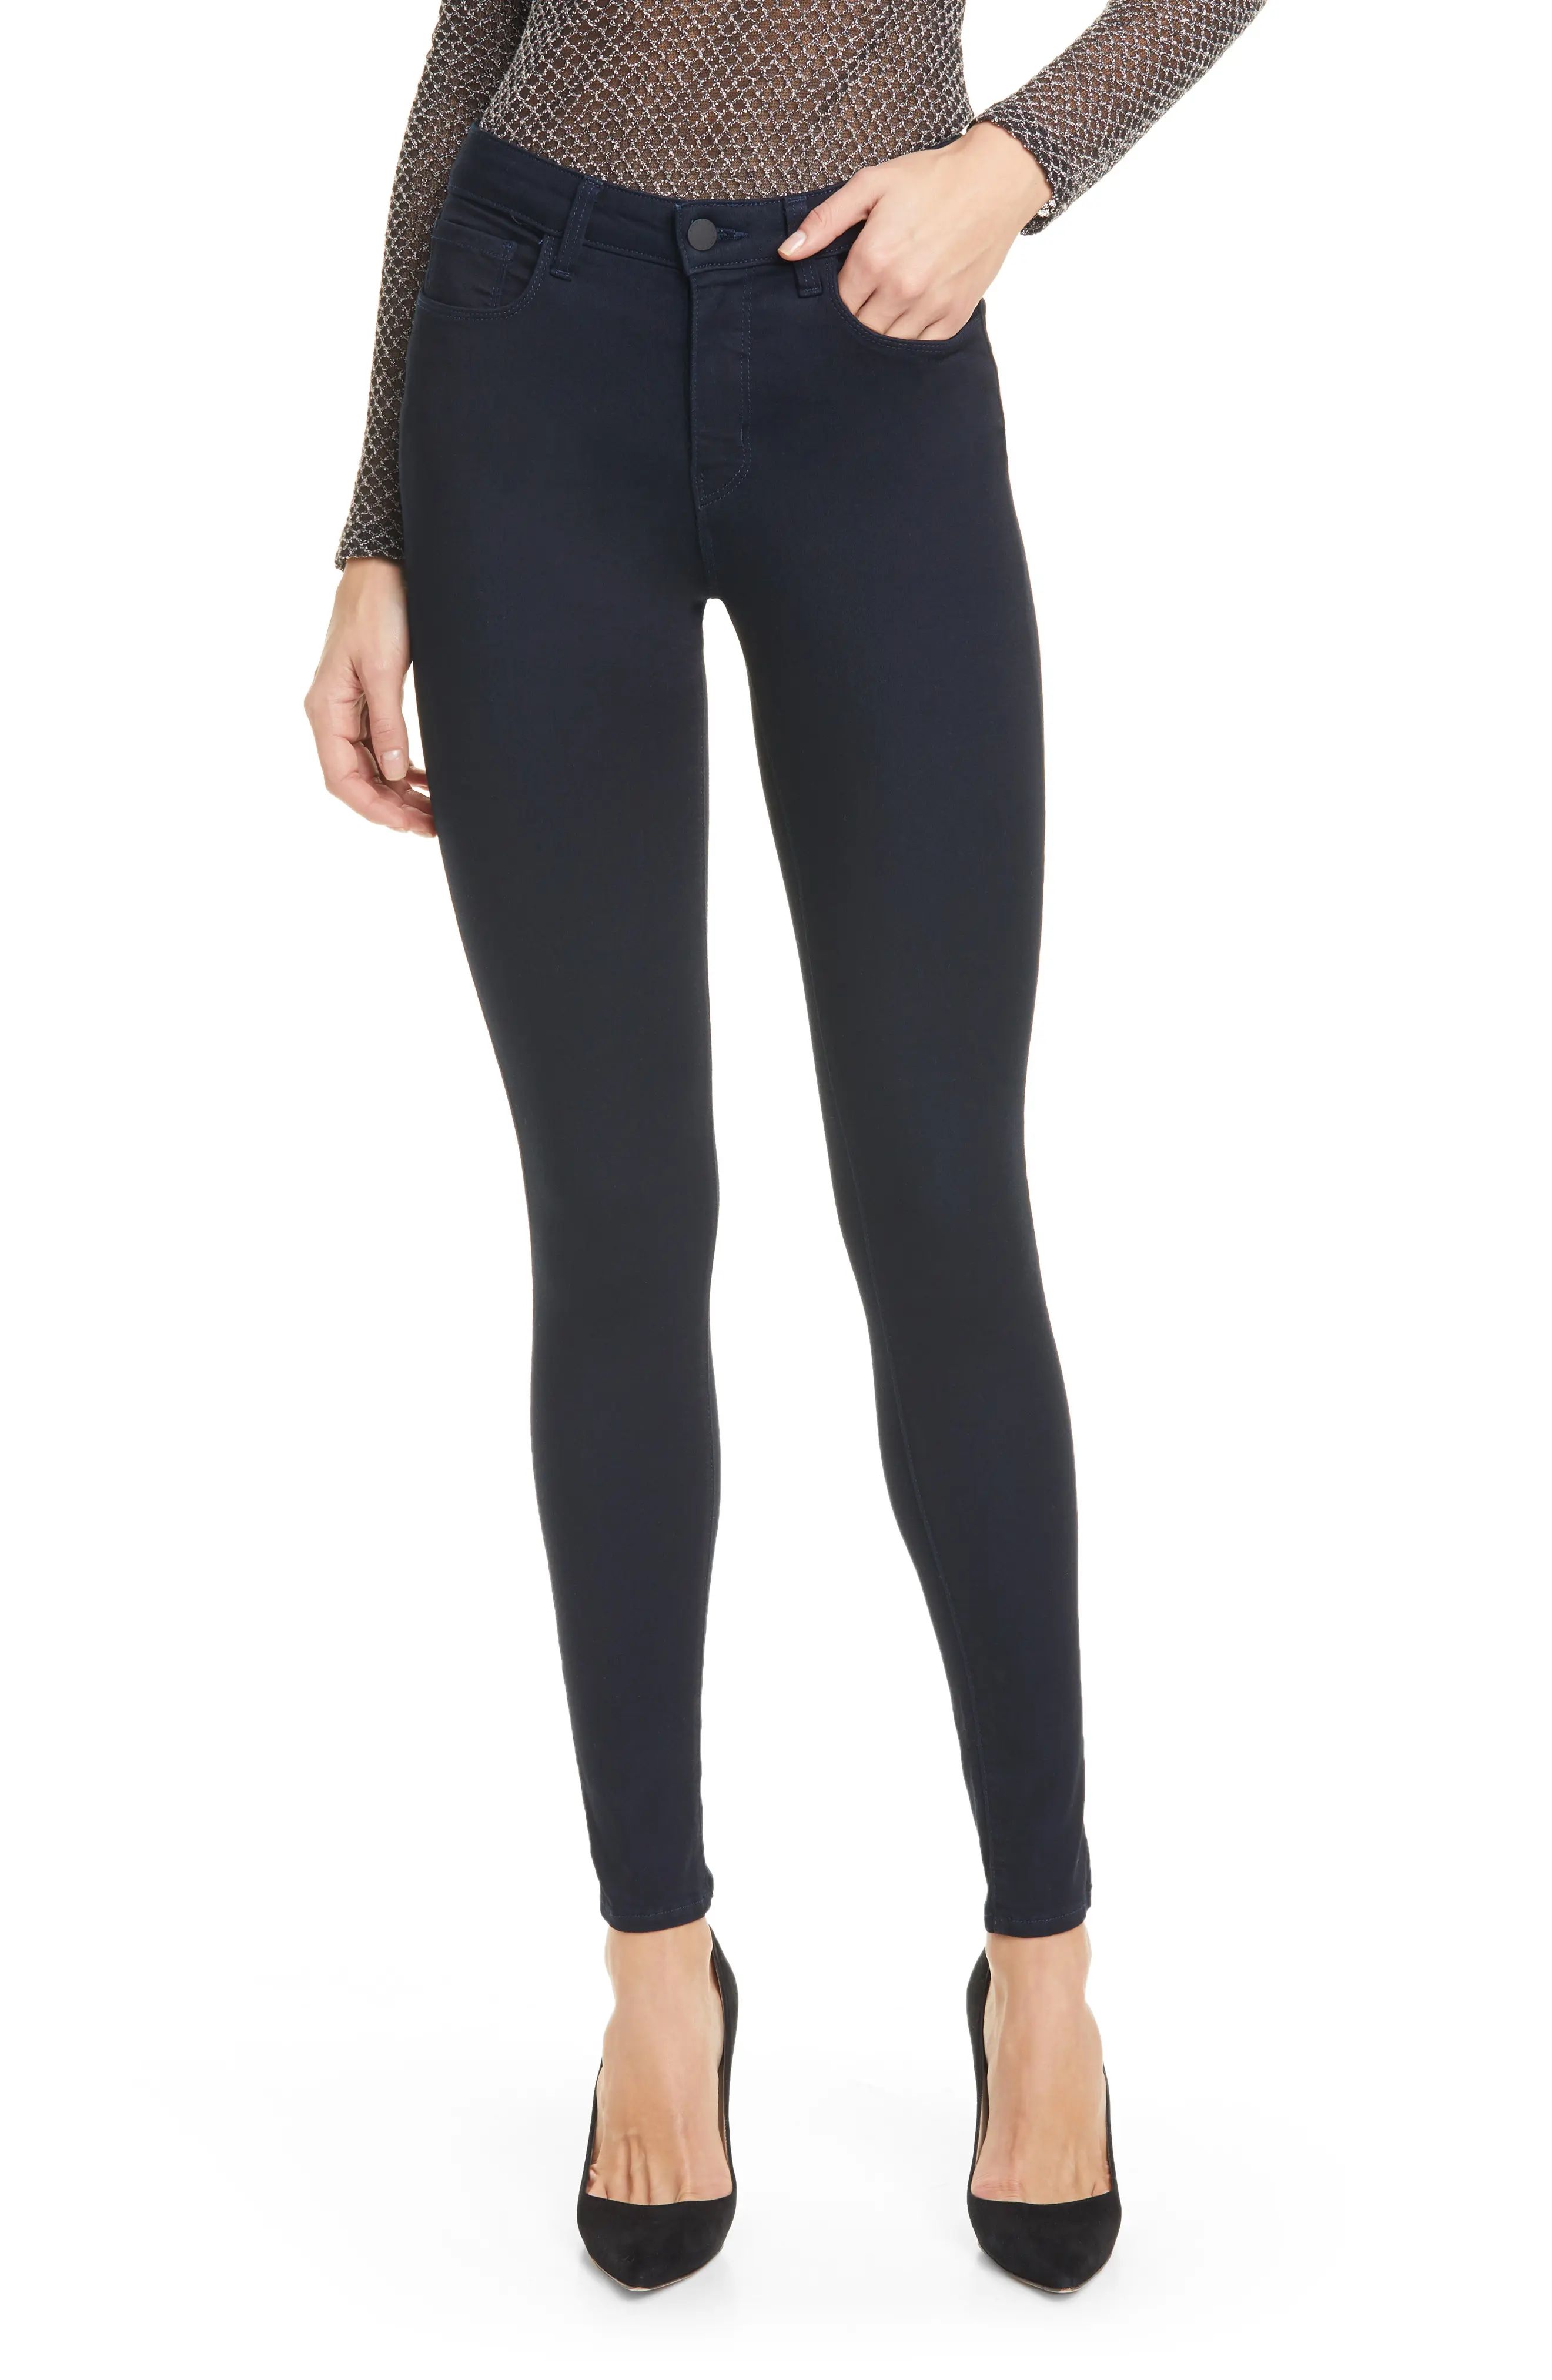 L'AGENCE Marguerite High Waist Skinny Jeans in Metro at Nordstrom, Size 25 | Nordstrom